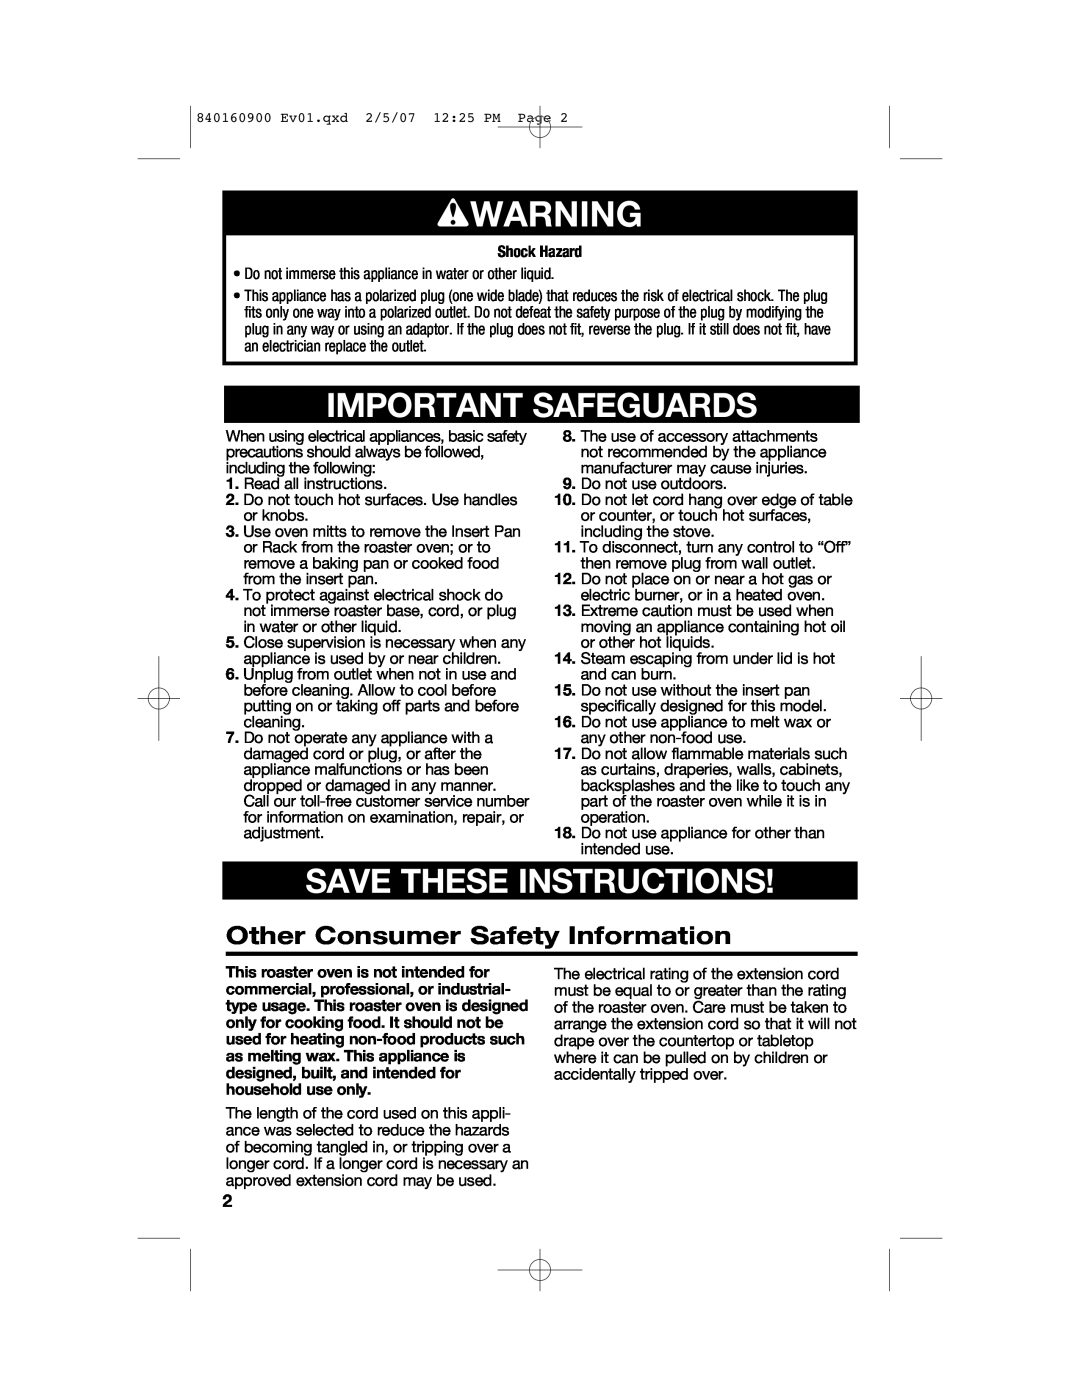 Proctor-Silex Roaster Oven wWARNING, Important Safeguards, Save These Instructions, Other Consumer Safety Information 